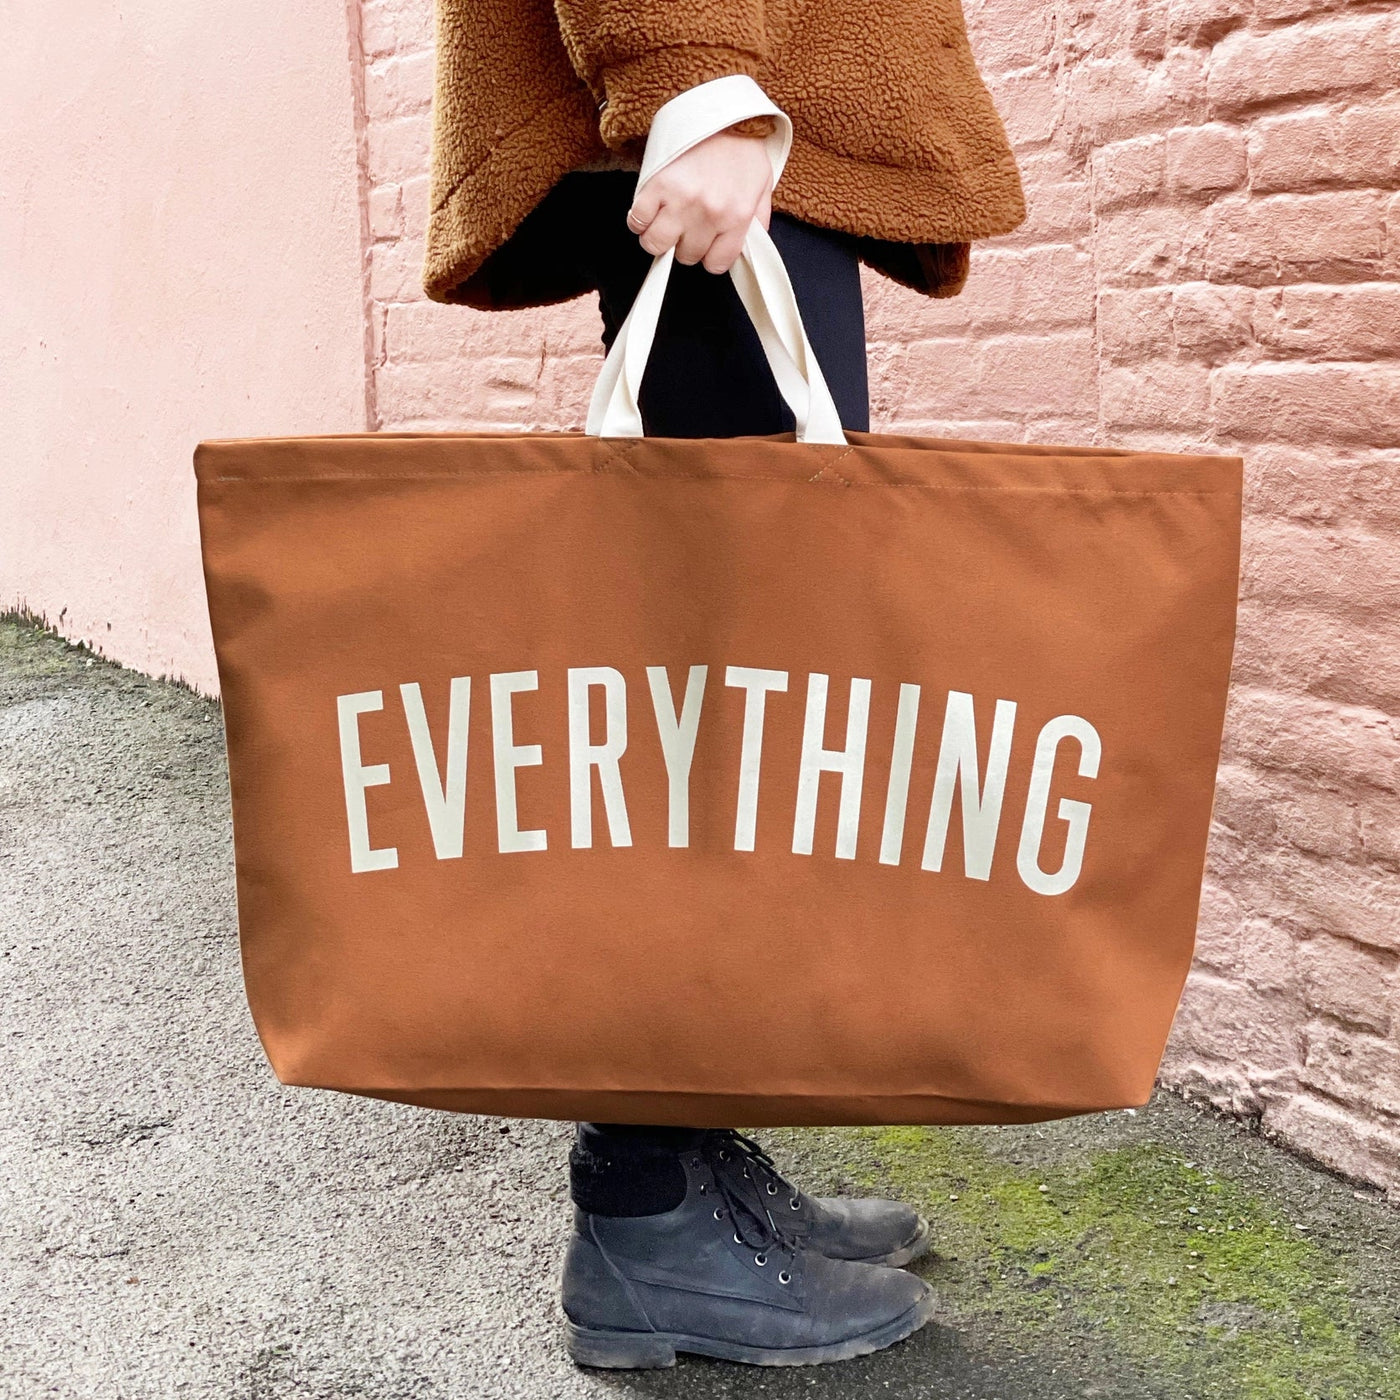 Everything - Tan REALLY Big Bag by Alphabet Bags - Petite Belle